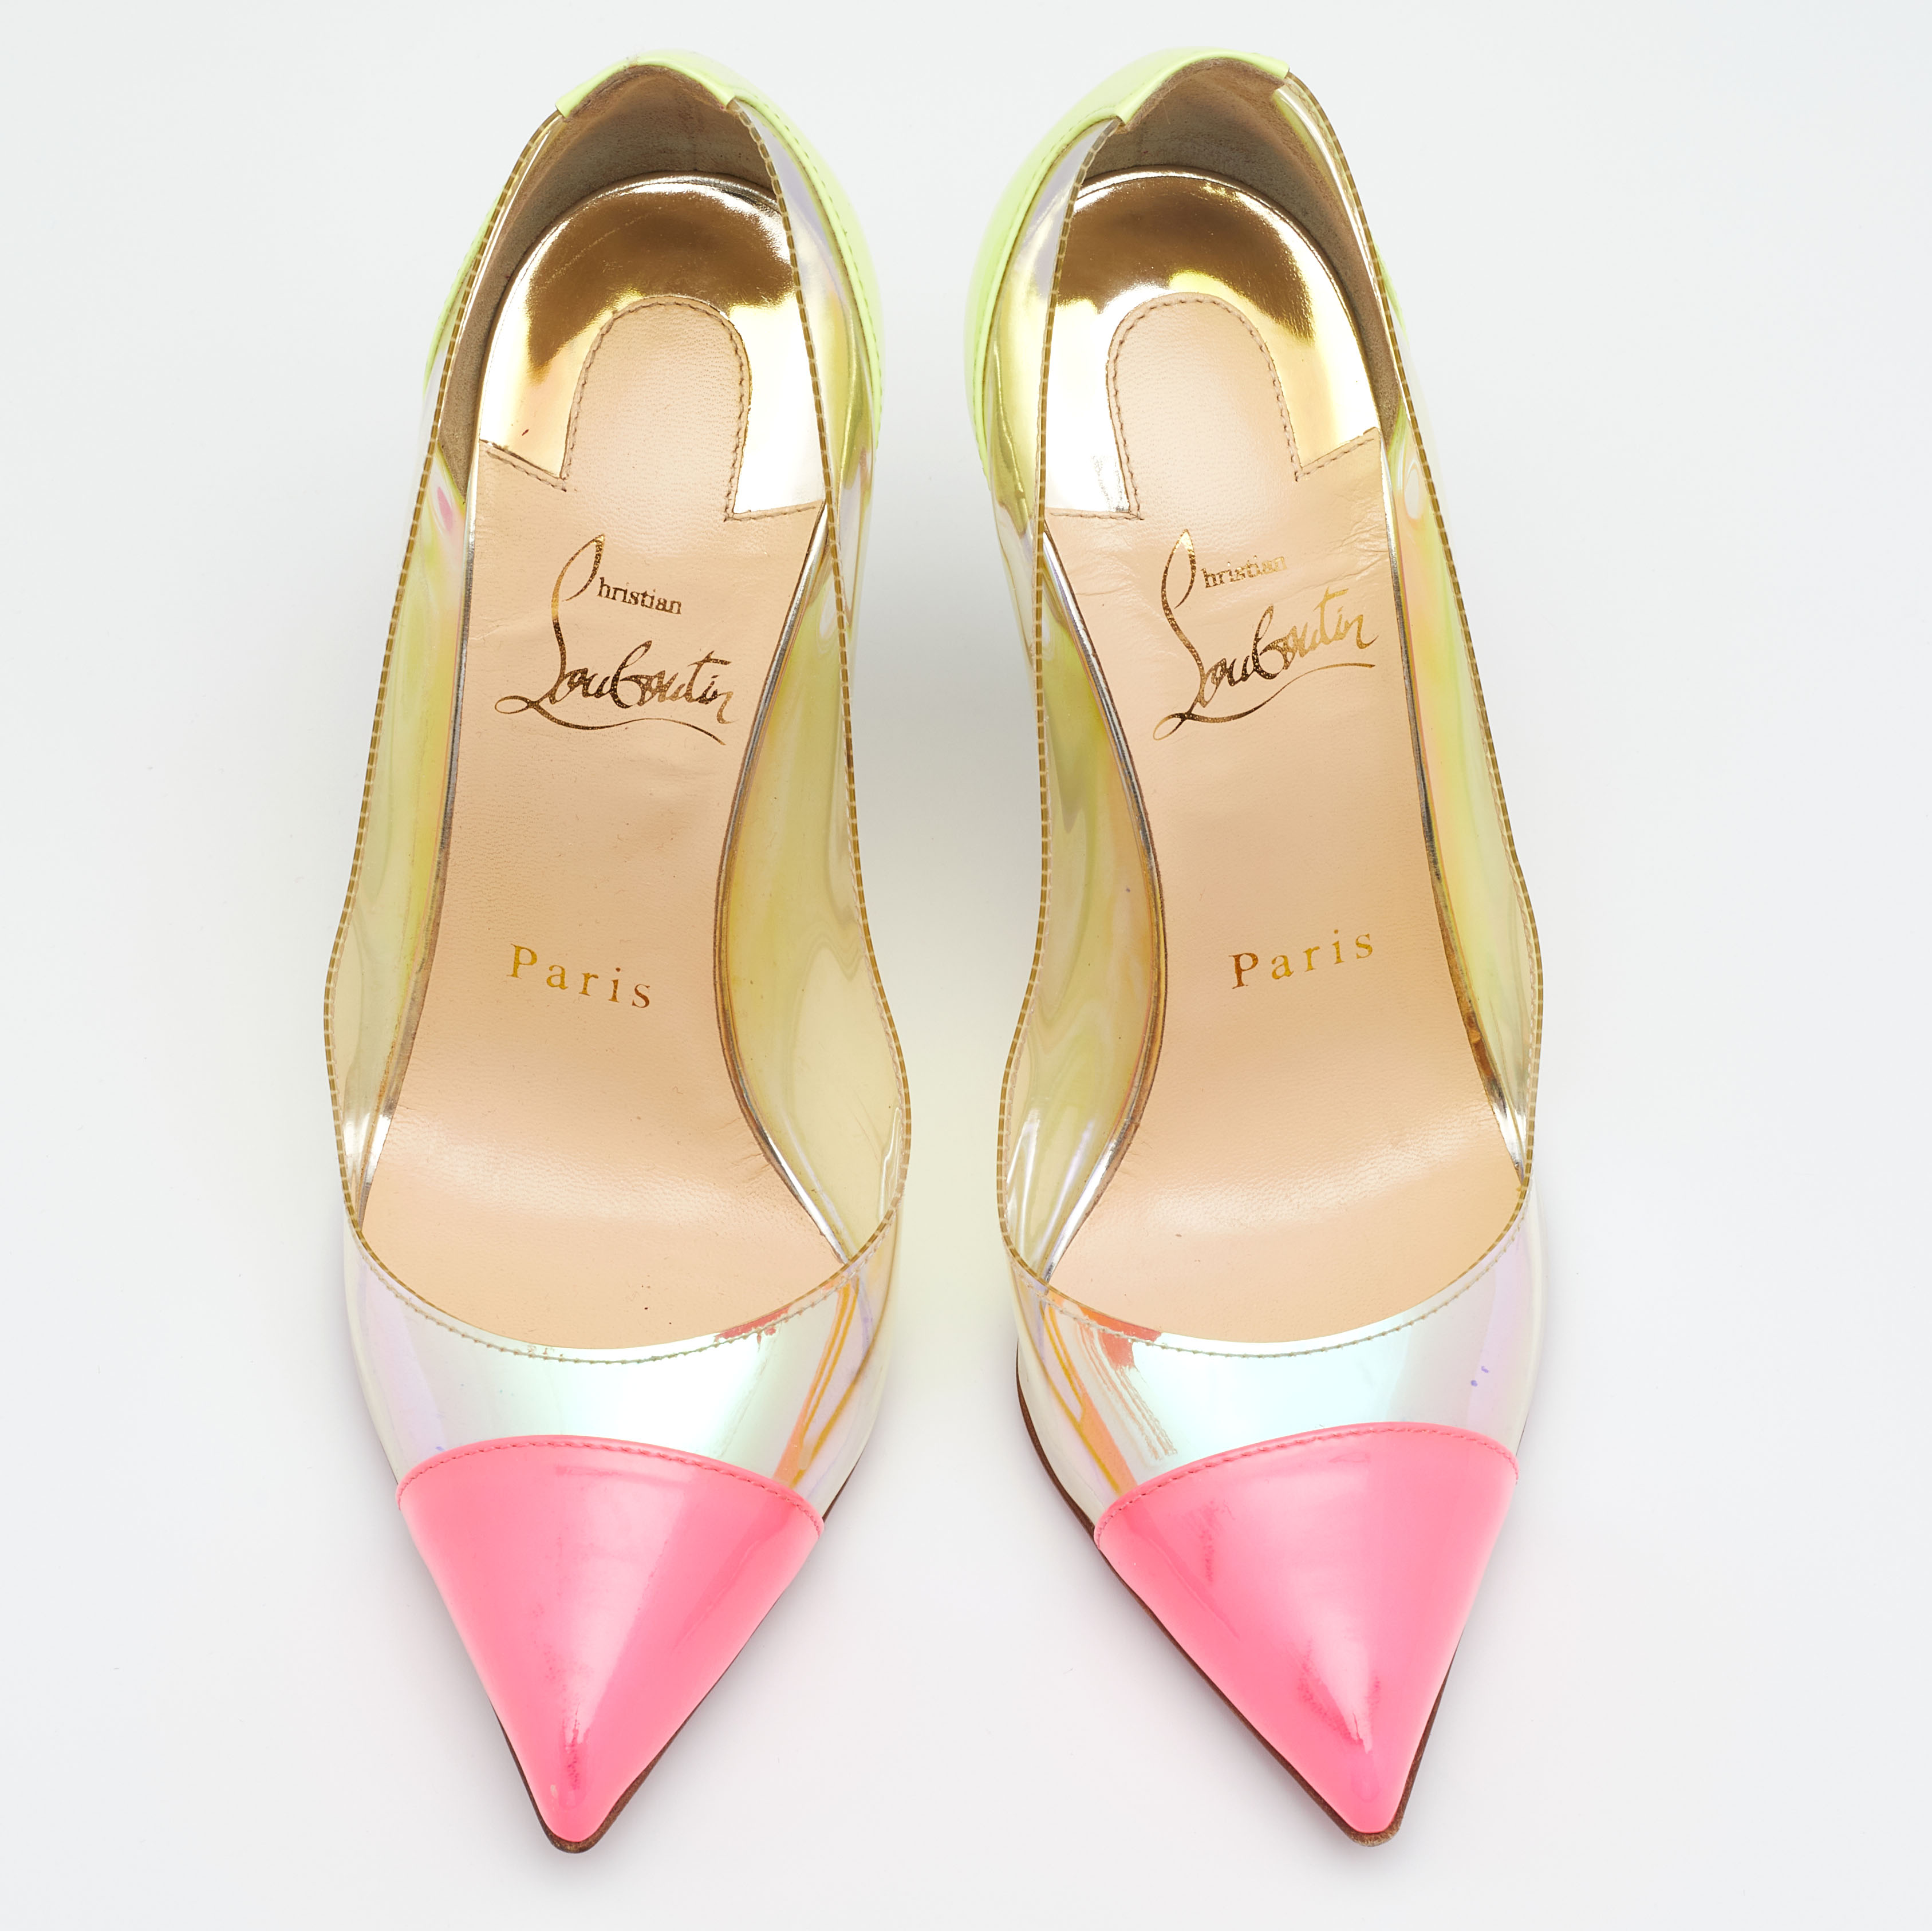 Christian Louboutin Multicolor PVC And Patent Leather Pumps Size 36